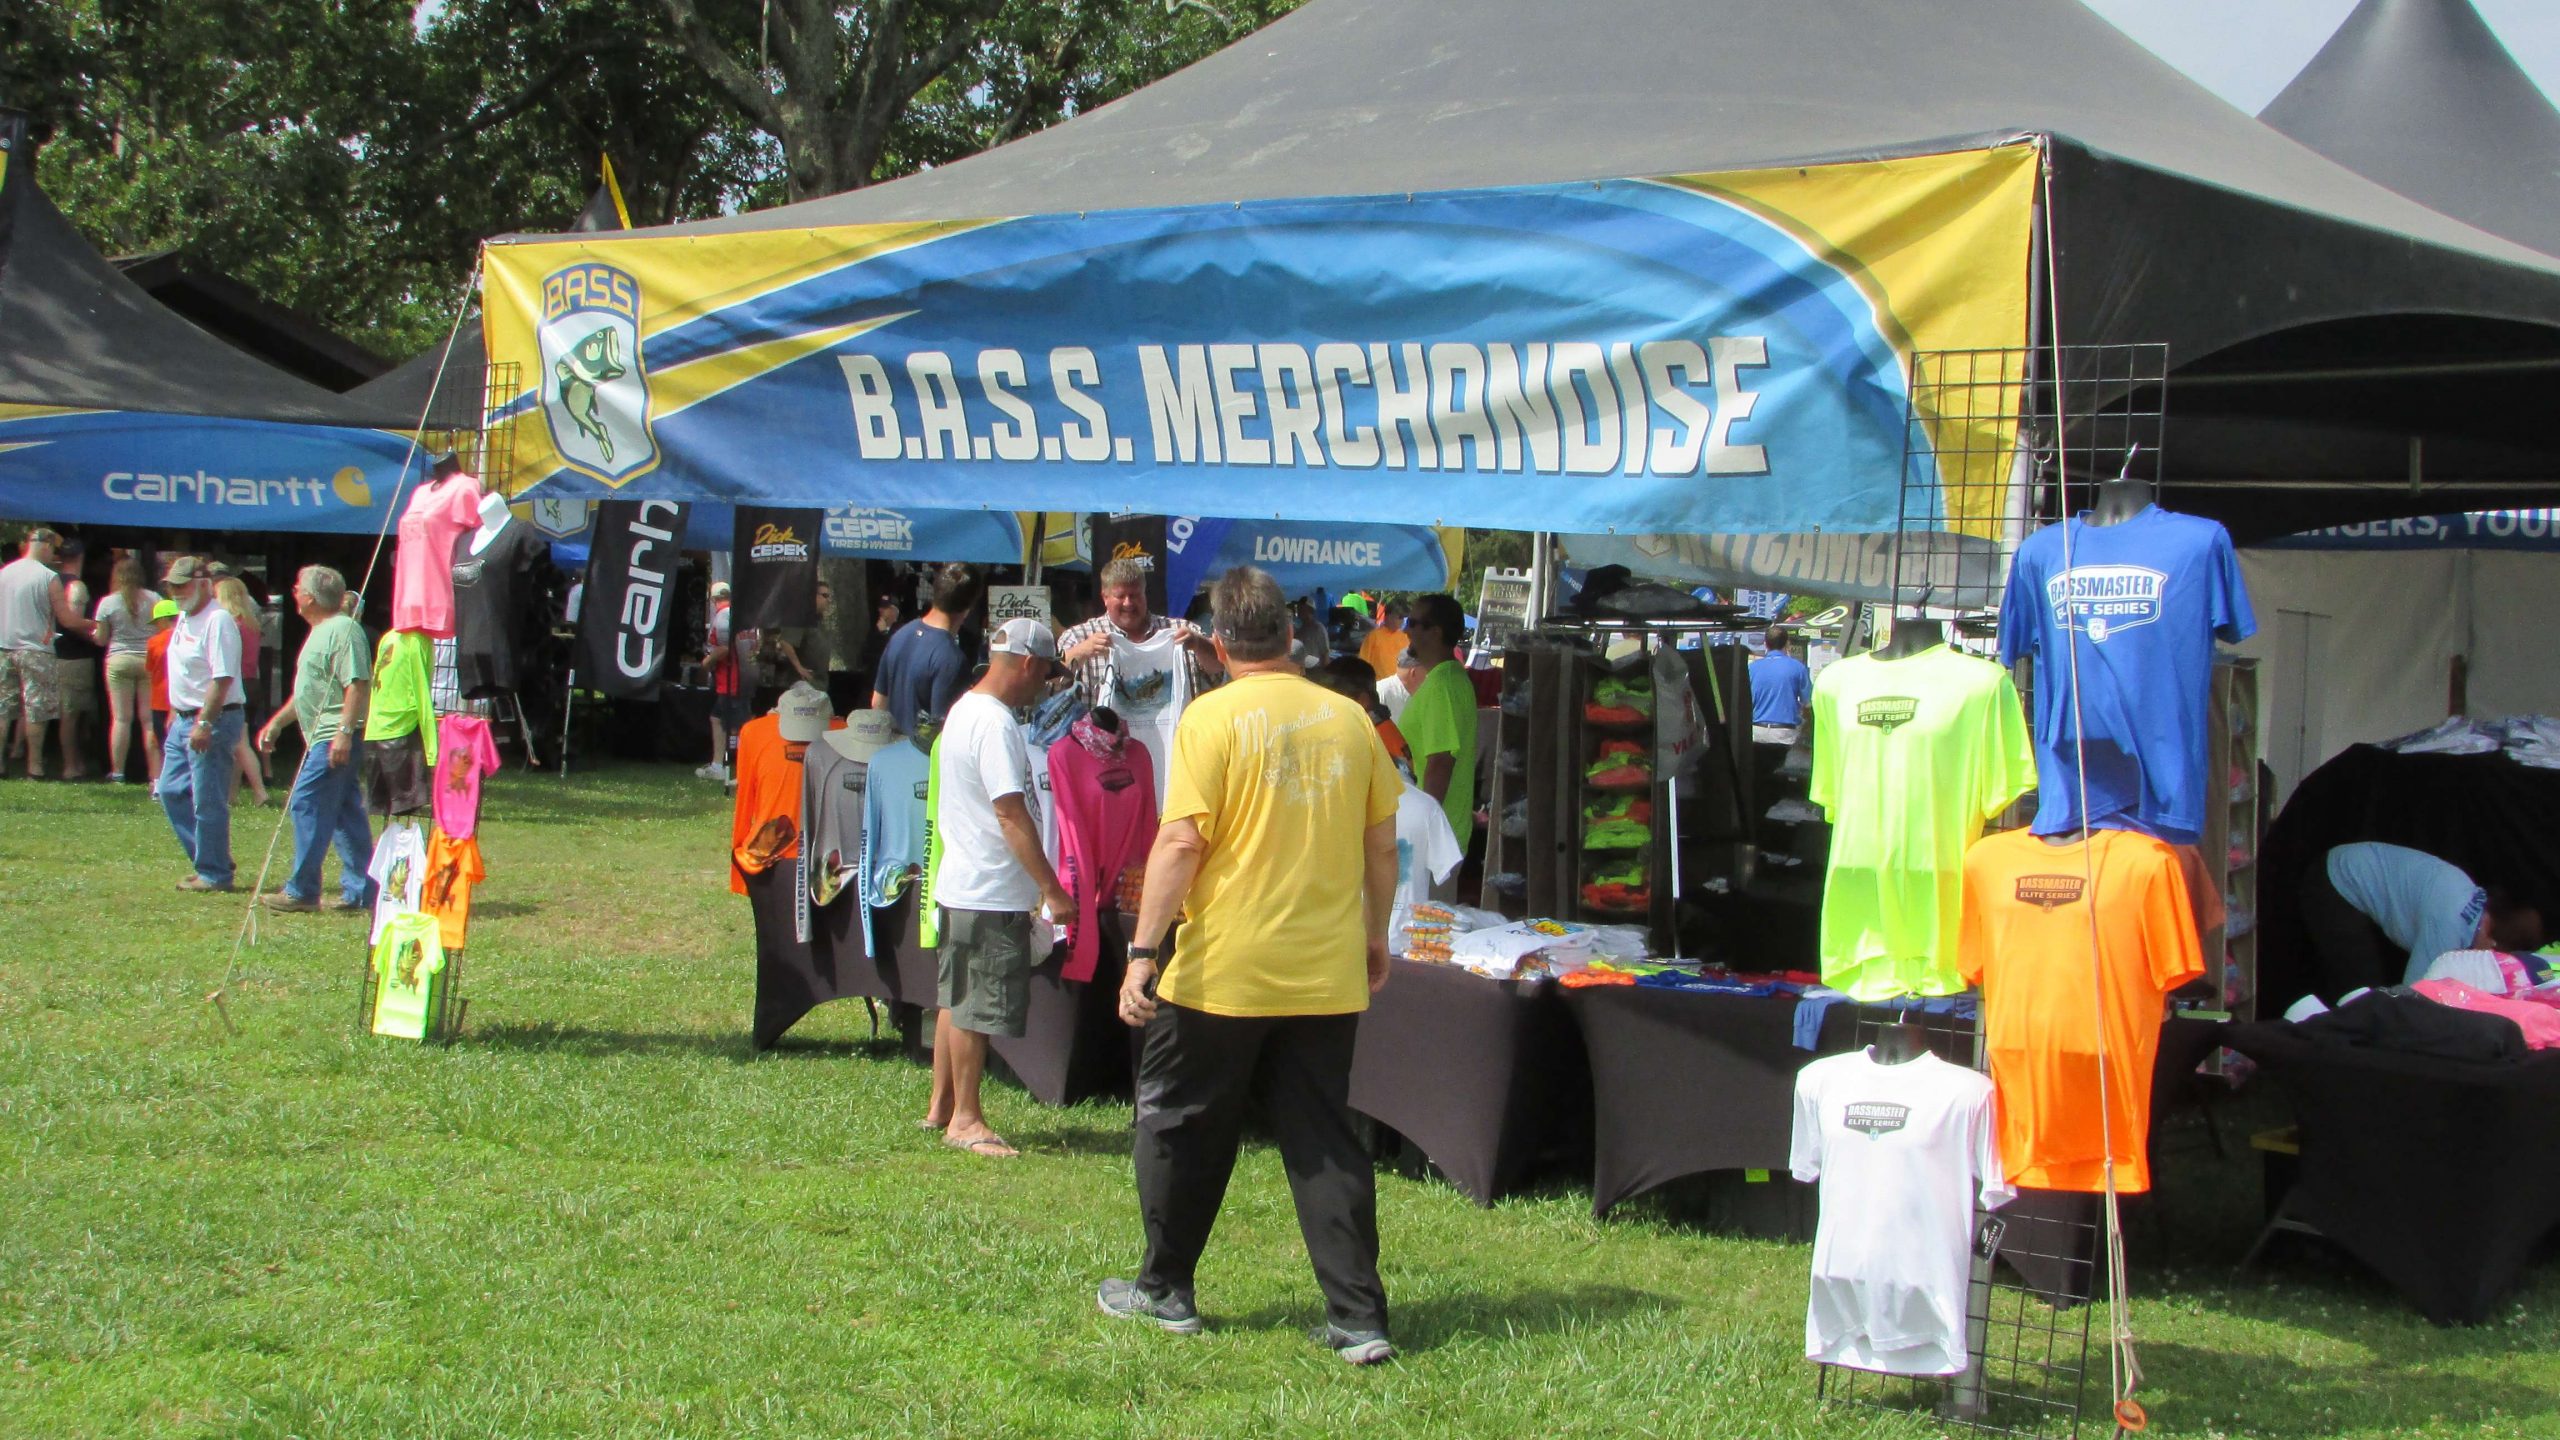 And nearby, fans could buy their own B.A.S.S. gear.